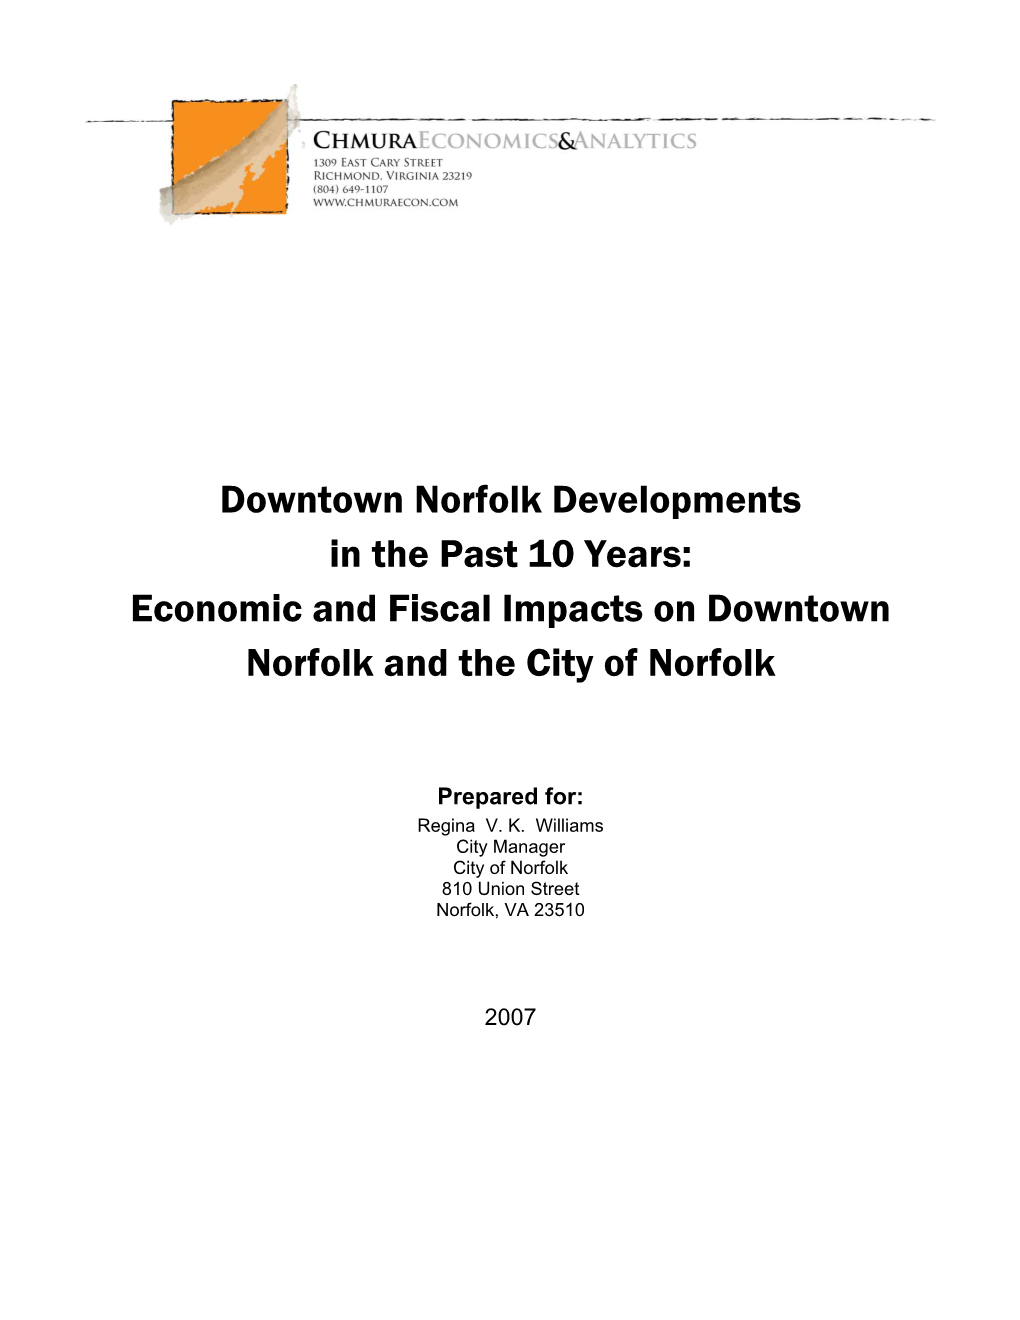 Downtown Norfolk Developments in the Past 10 Years: Economic and Fiscal Impacts on Downtown Norfolk and the City of Norfolk